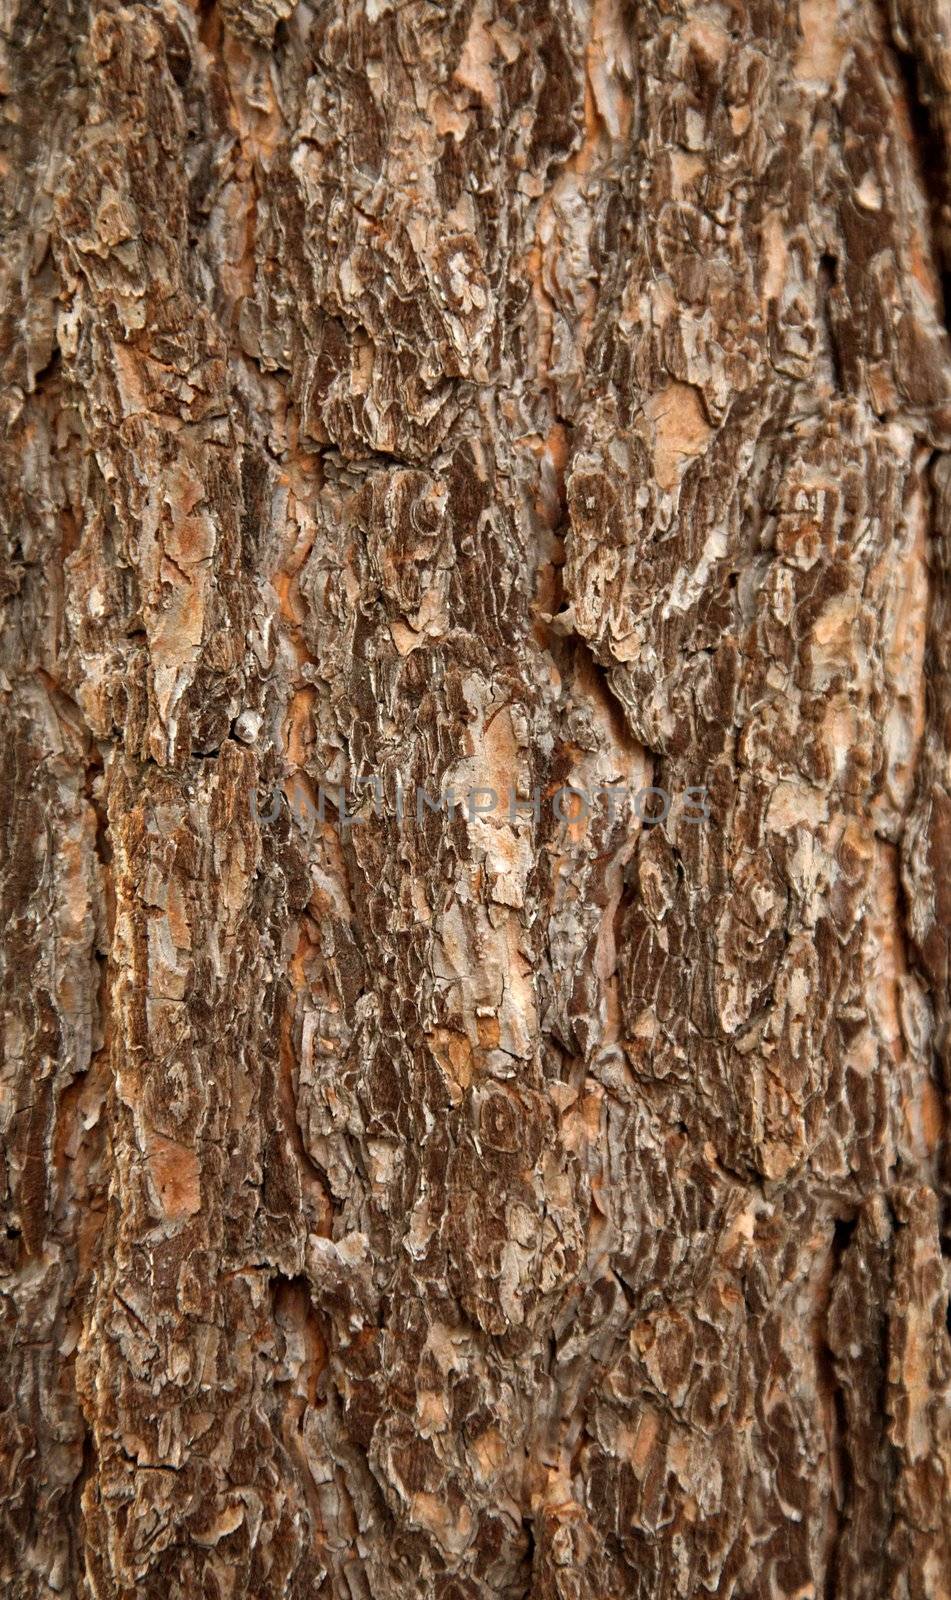 Surface of a pine bark by pzaxe